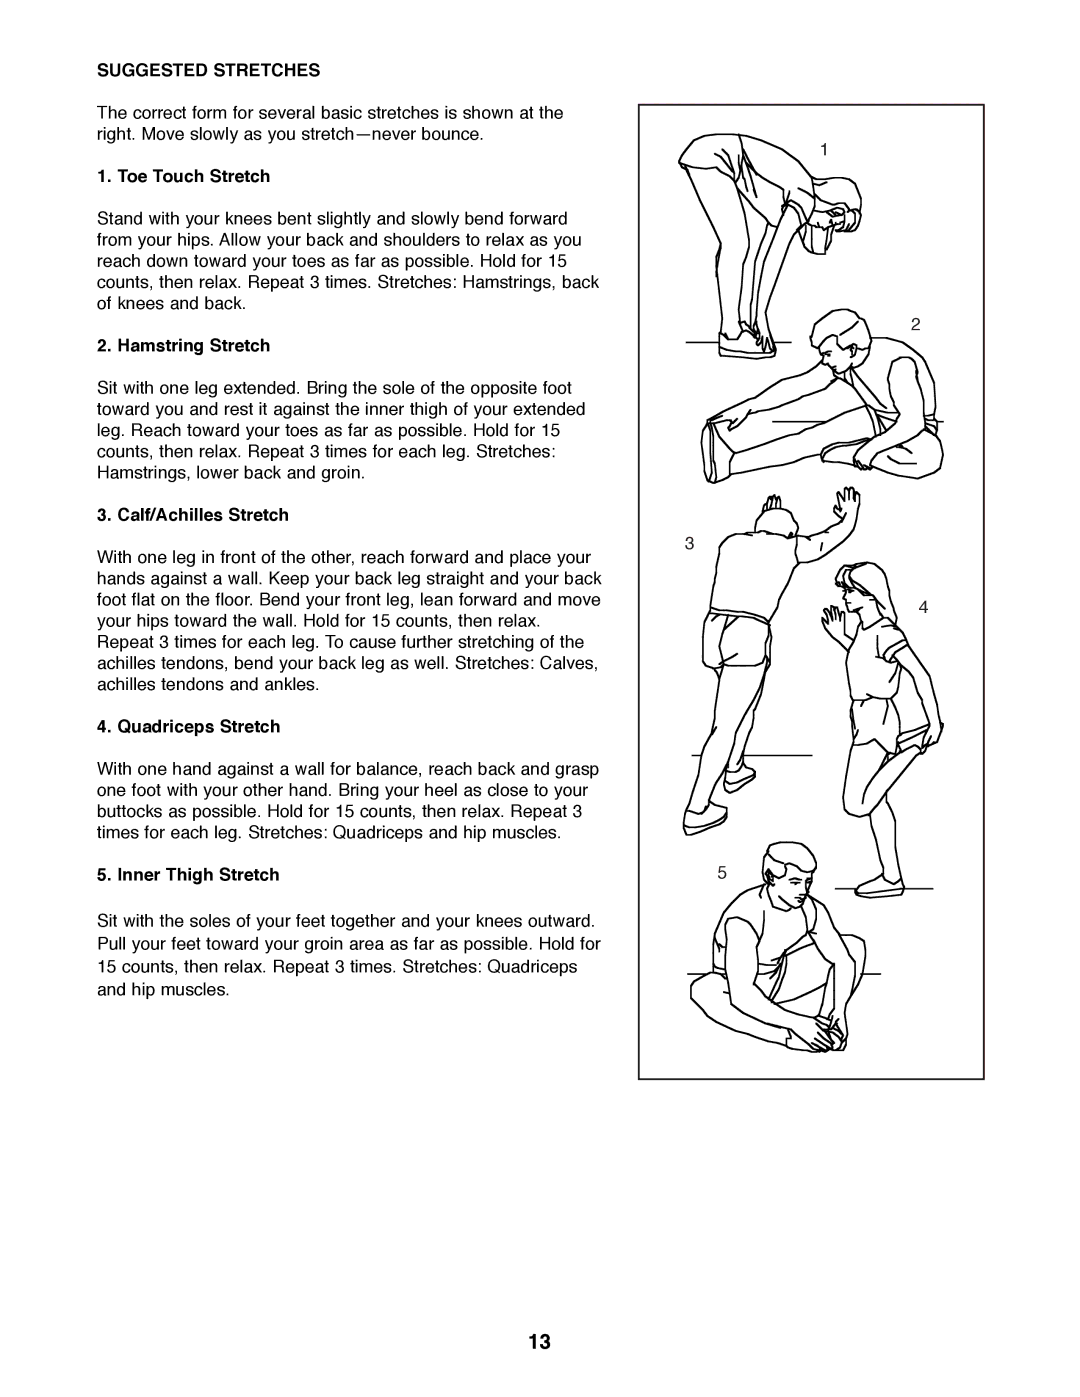 ProForm PFEL03900 manual Suggested Stretches 